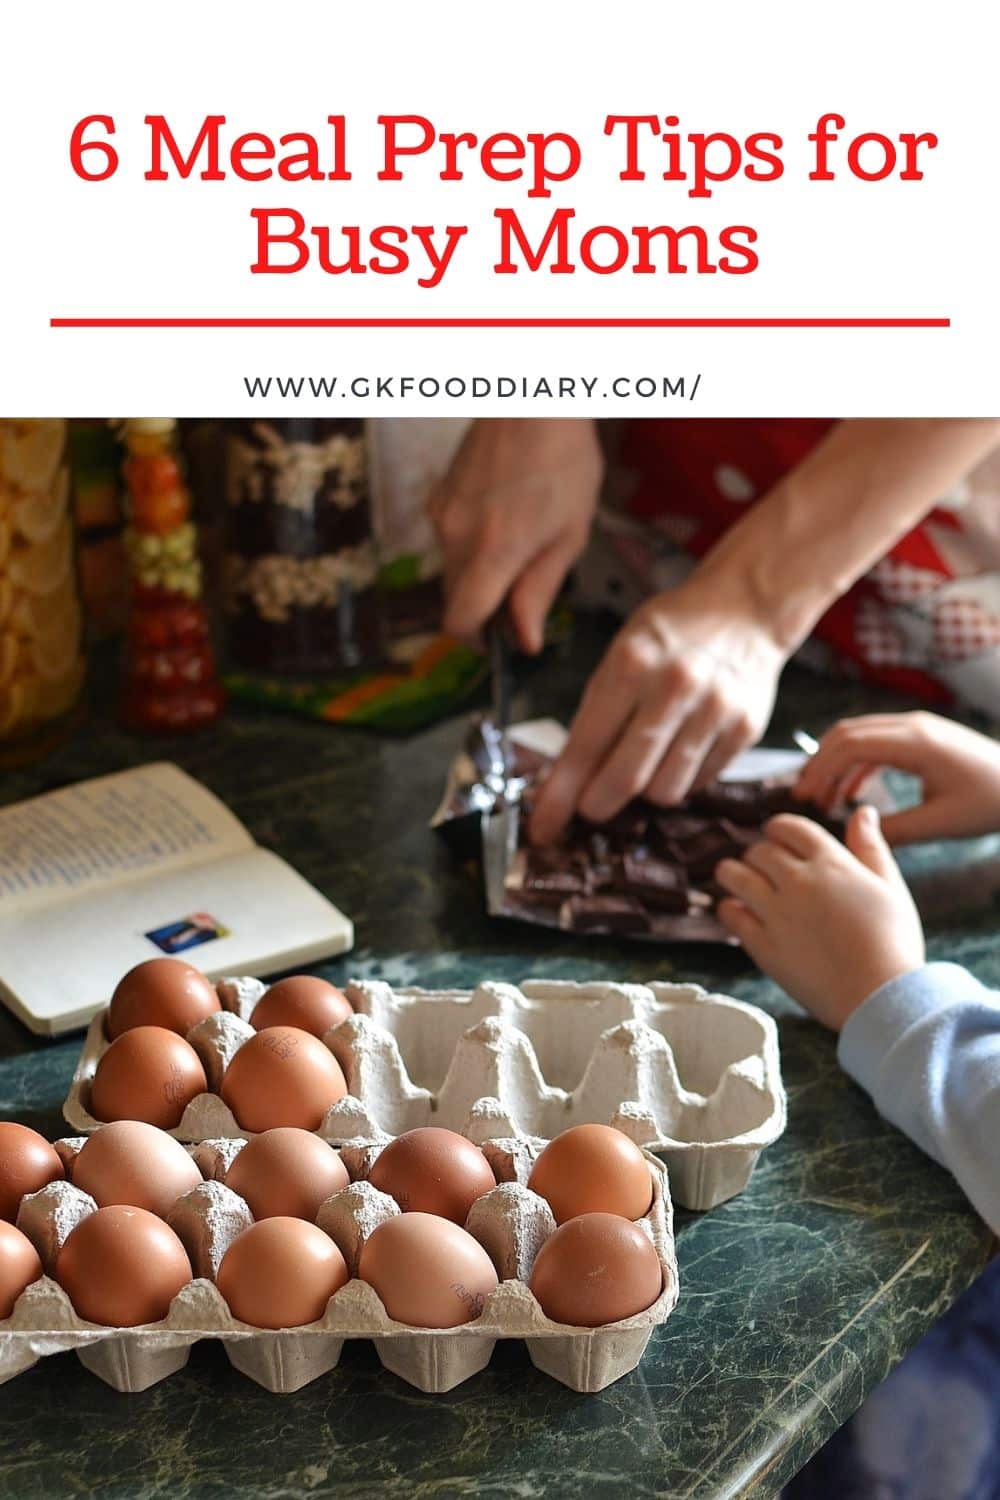 6 Meal Prep Tips for Busy Moms